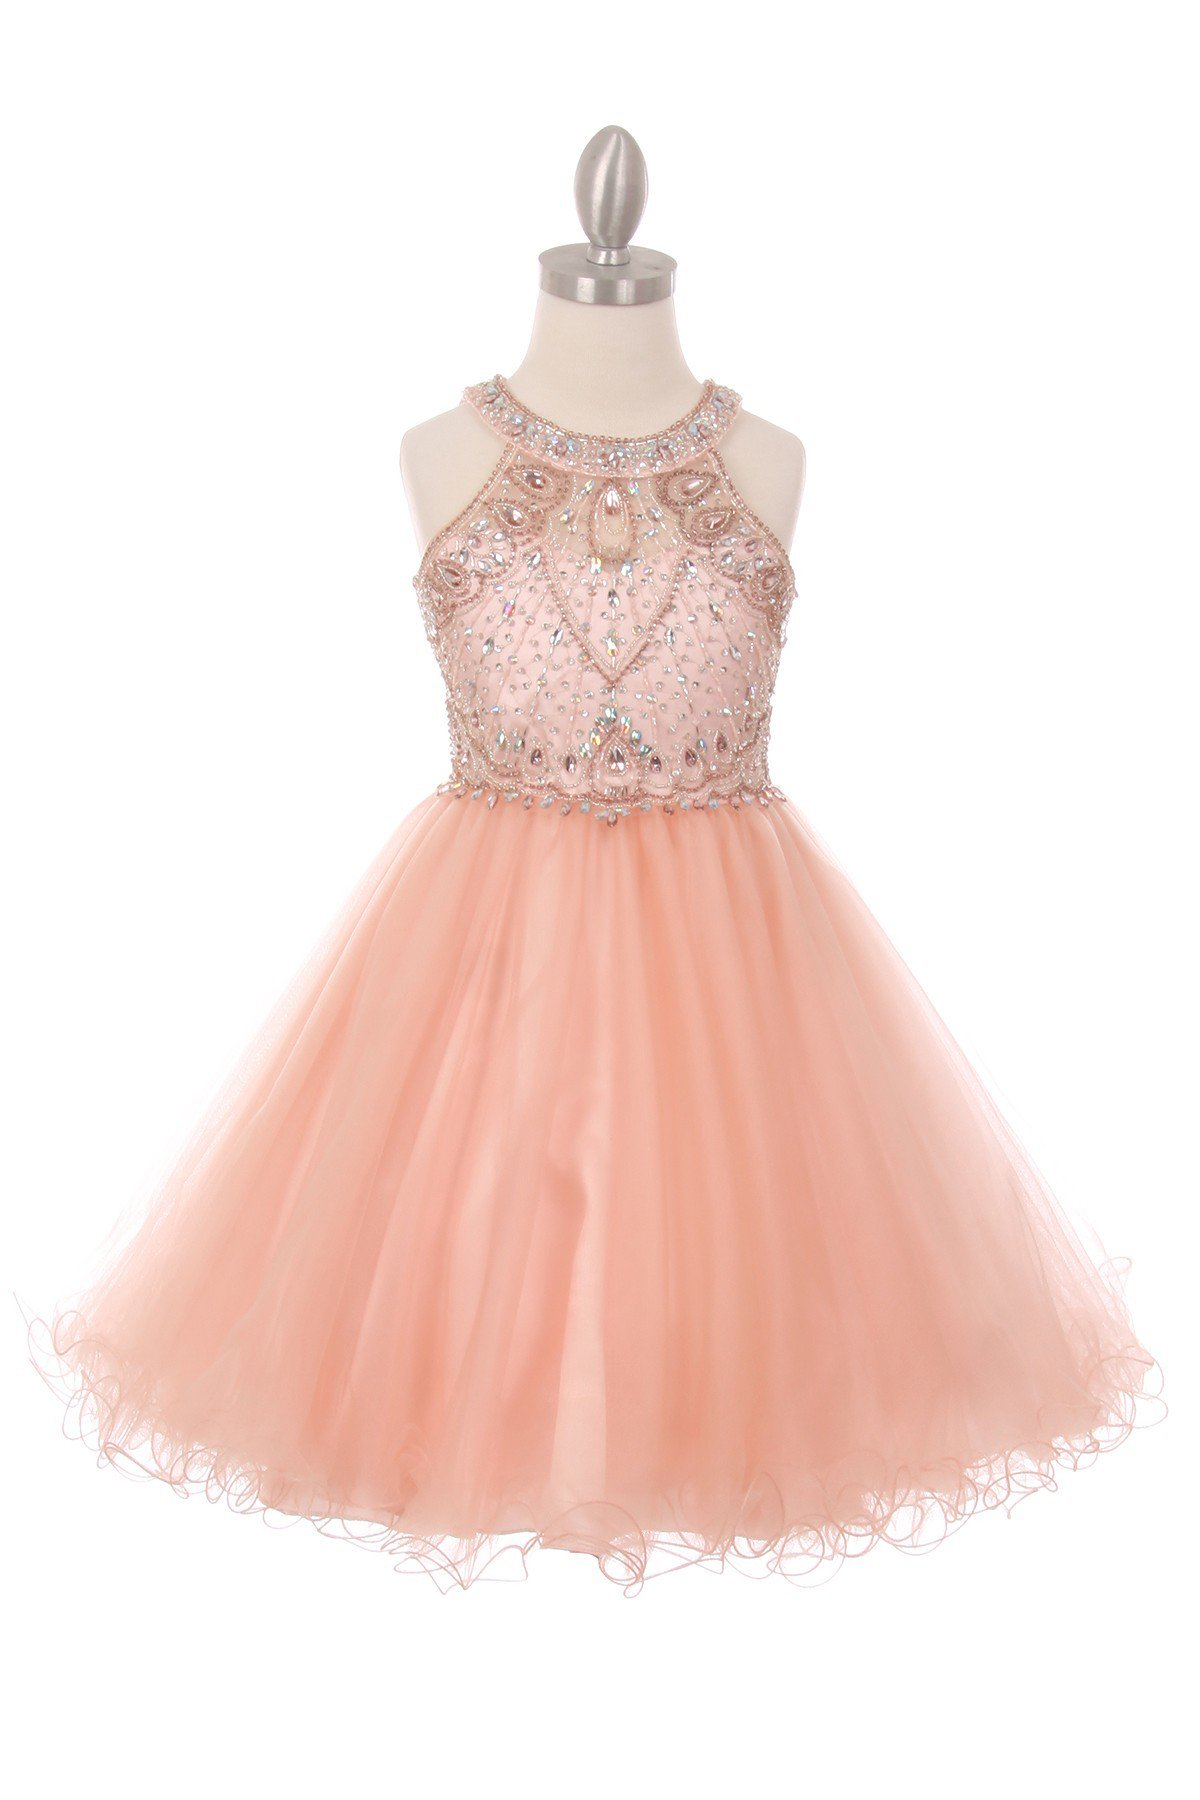 blush special occasion girl dresses